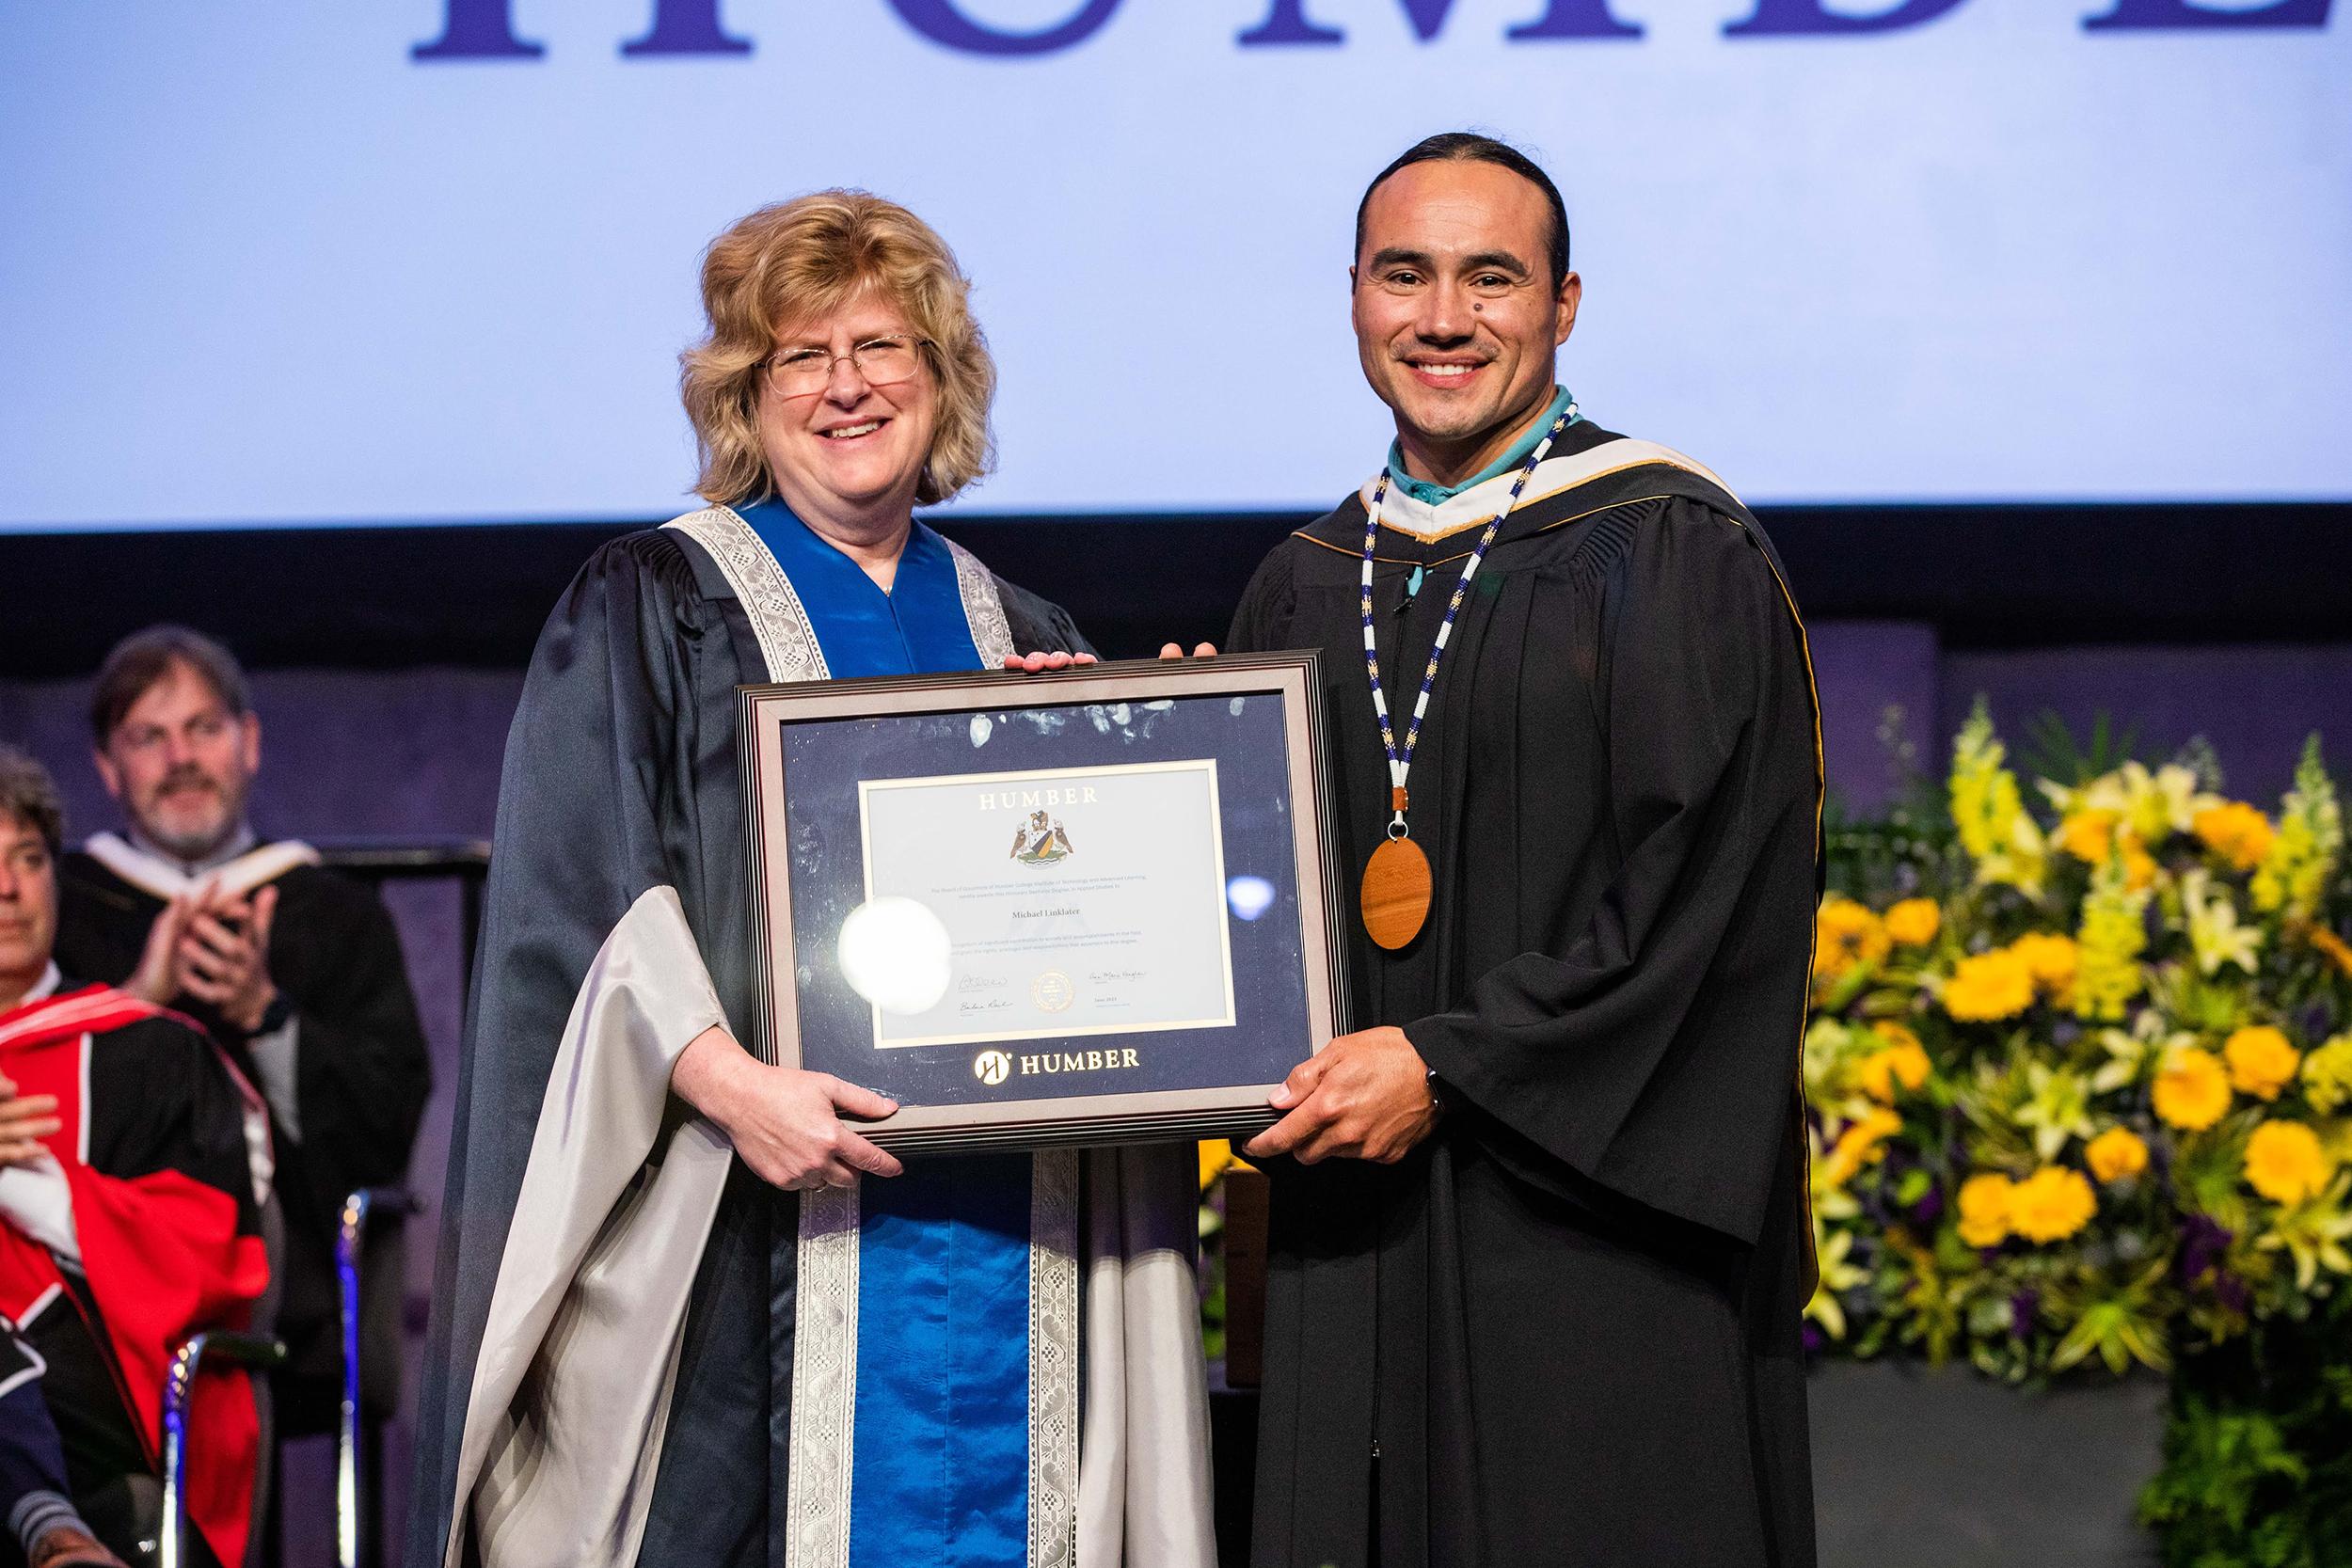 A person is presented with an honorary degree by another person while standing on stage.